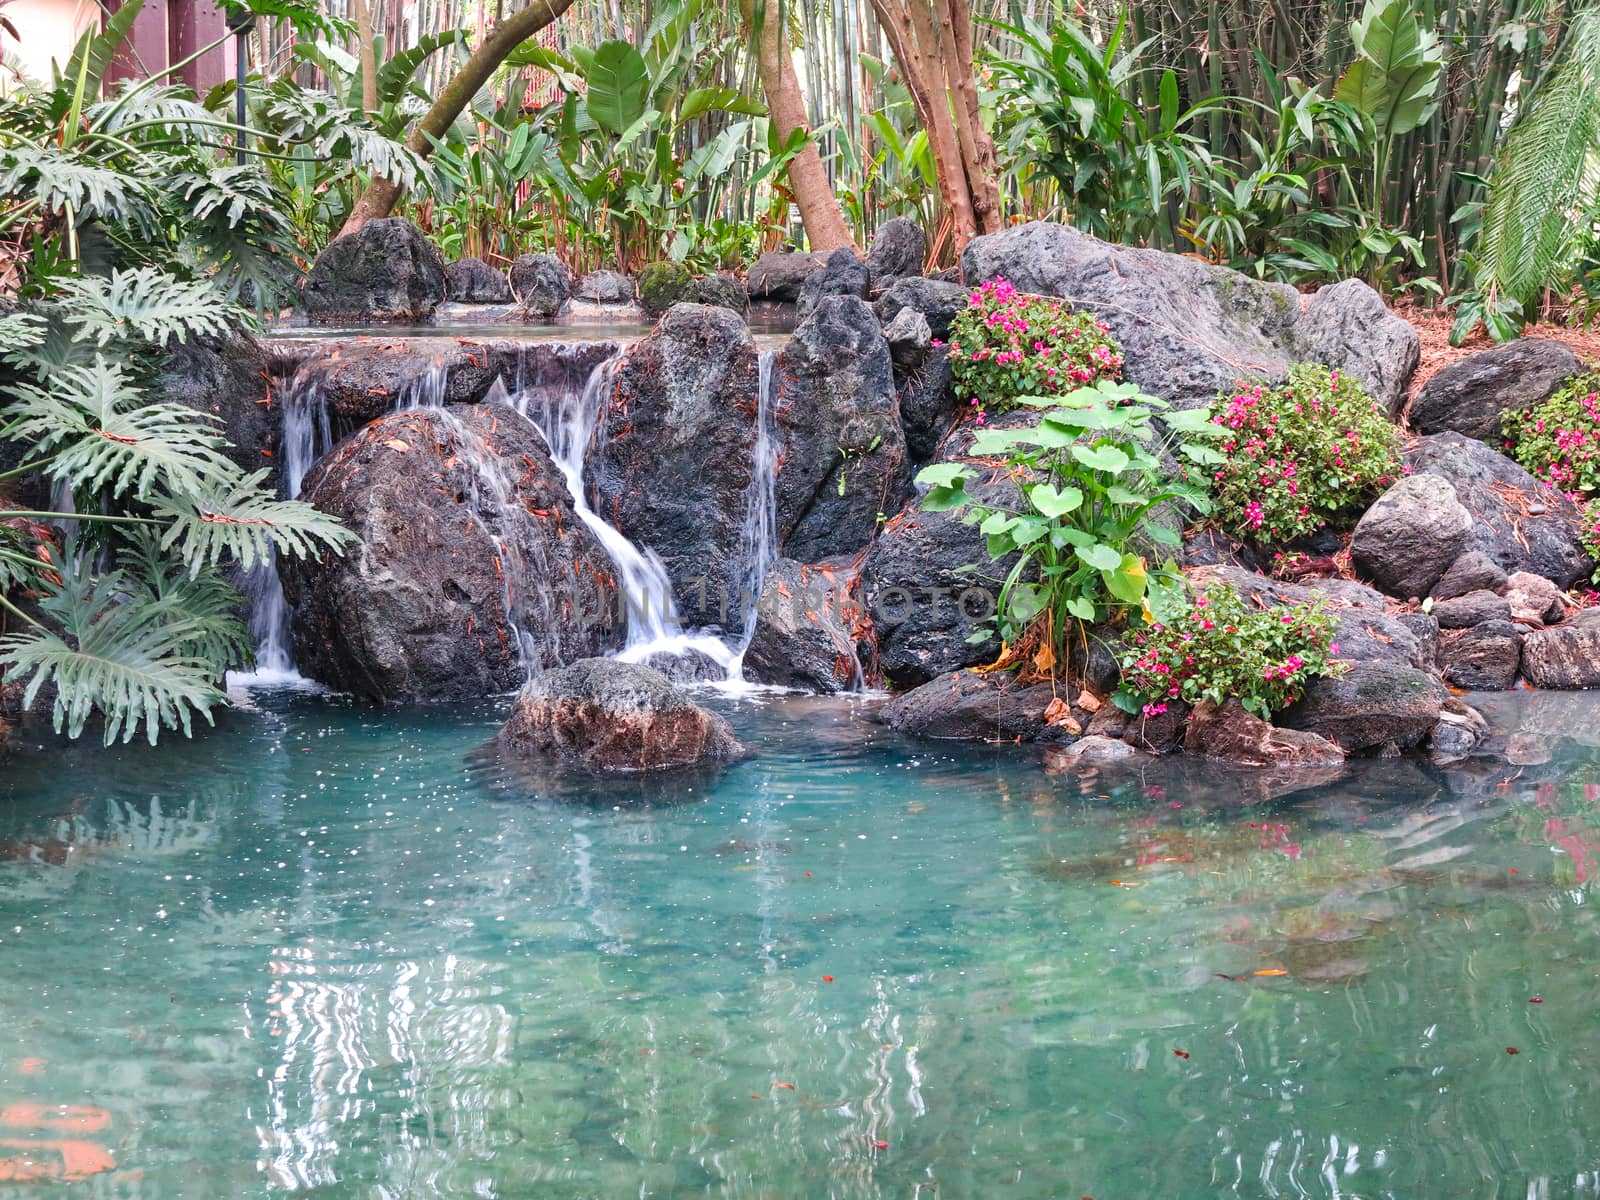 A small waterfall over rocks into pond